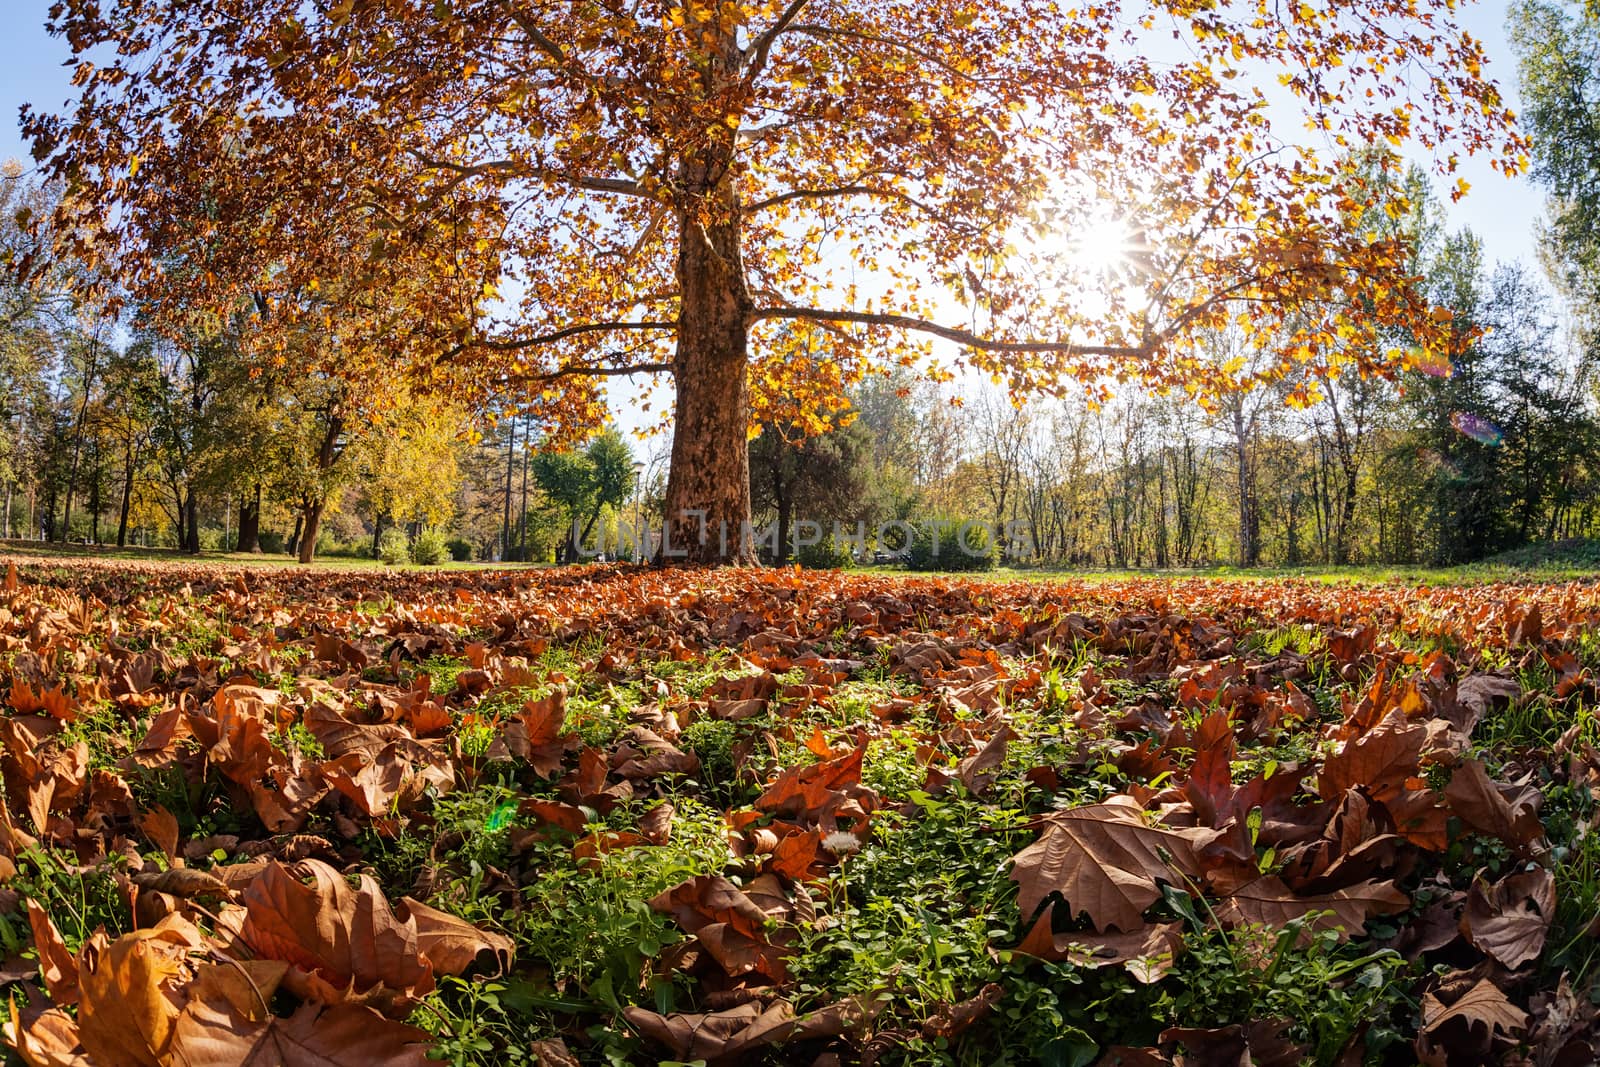 trees with fallen leaves in the park on a sunny day